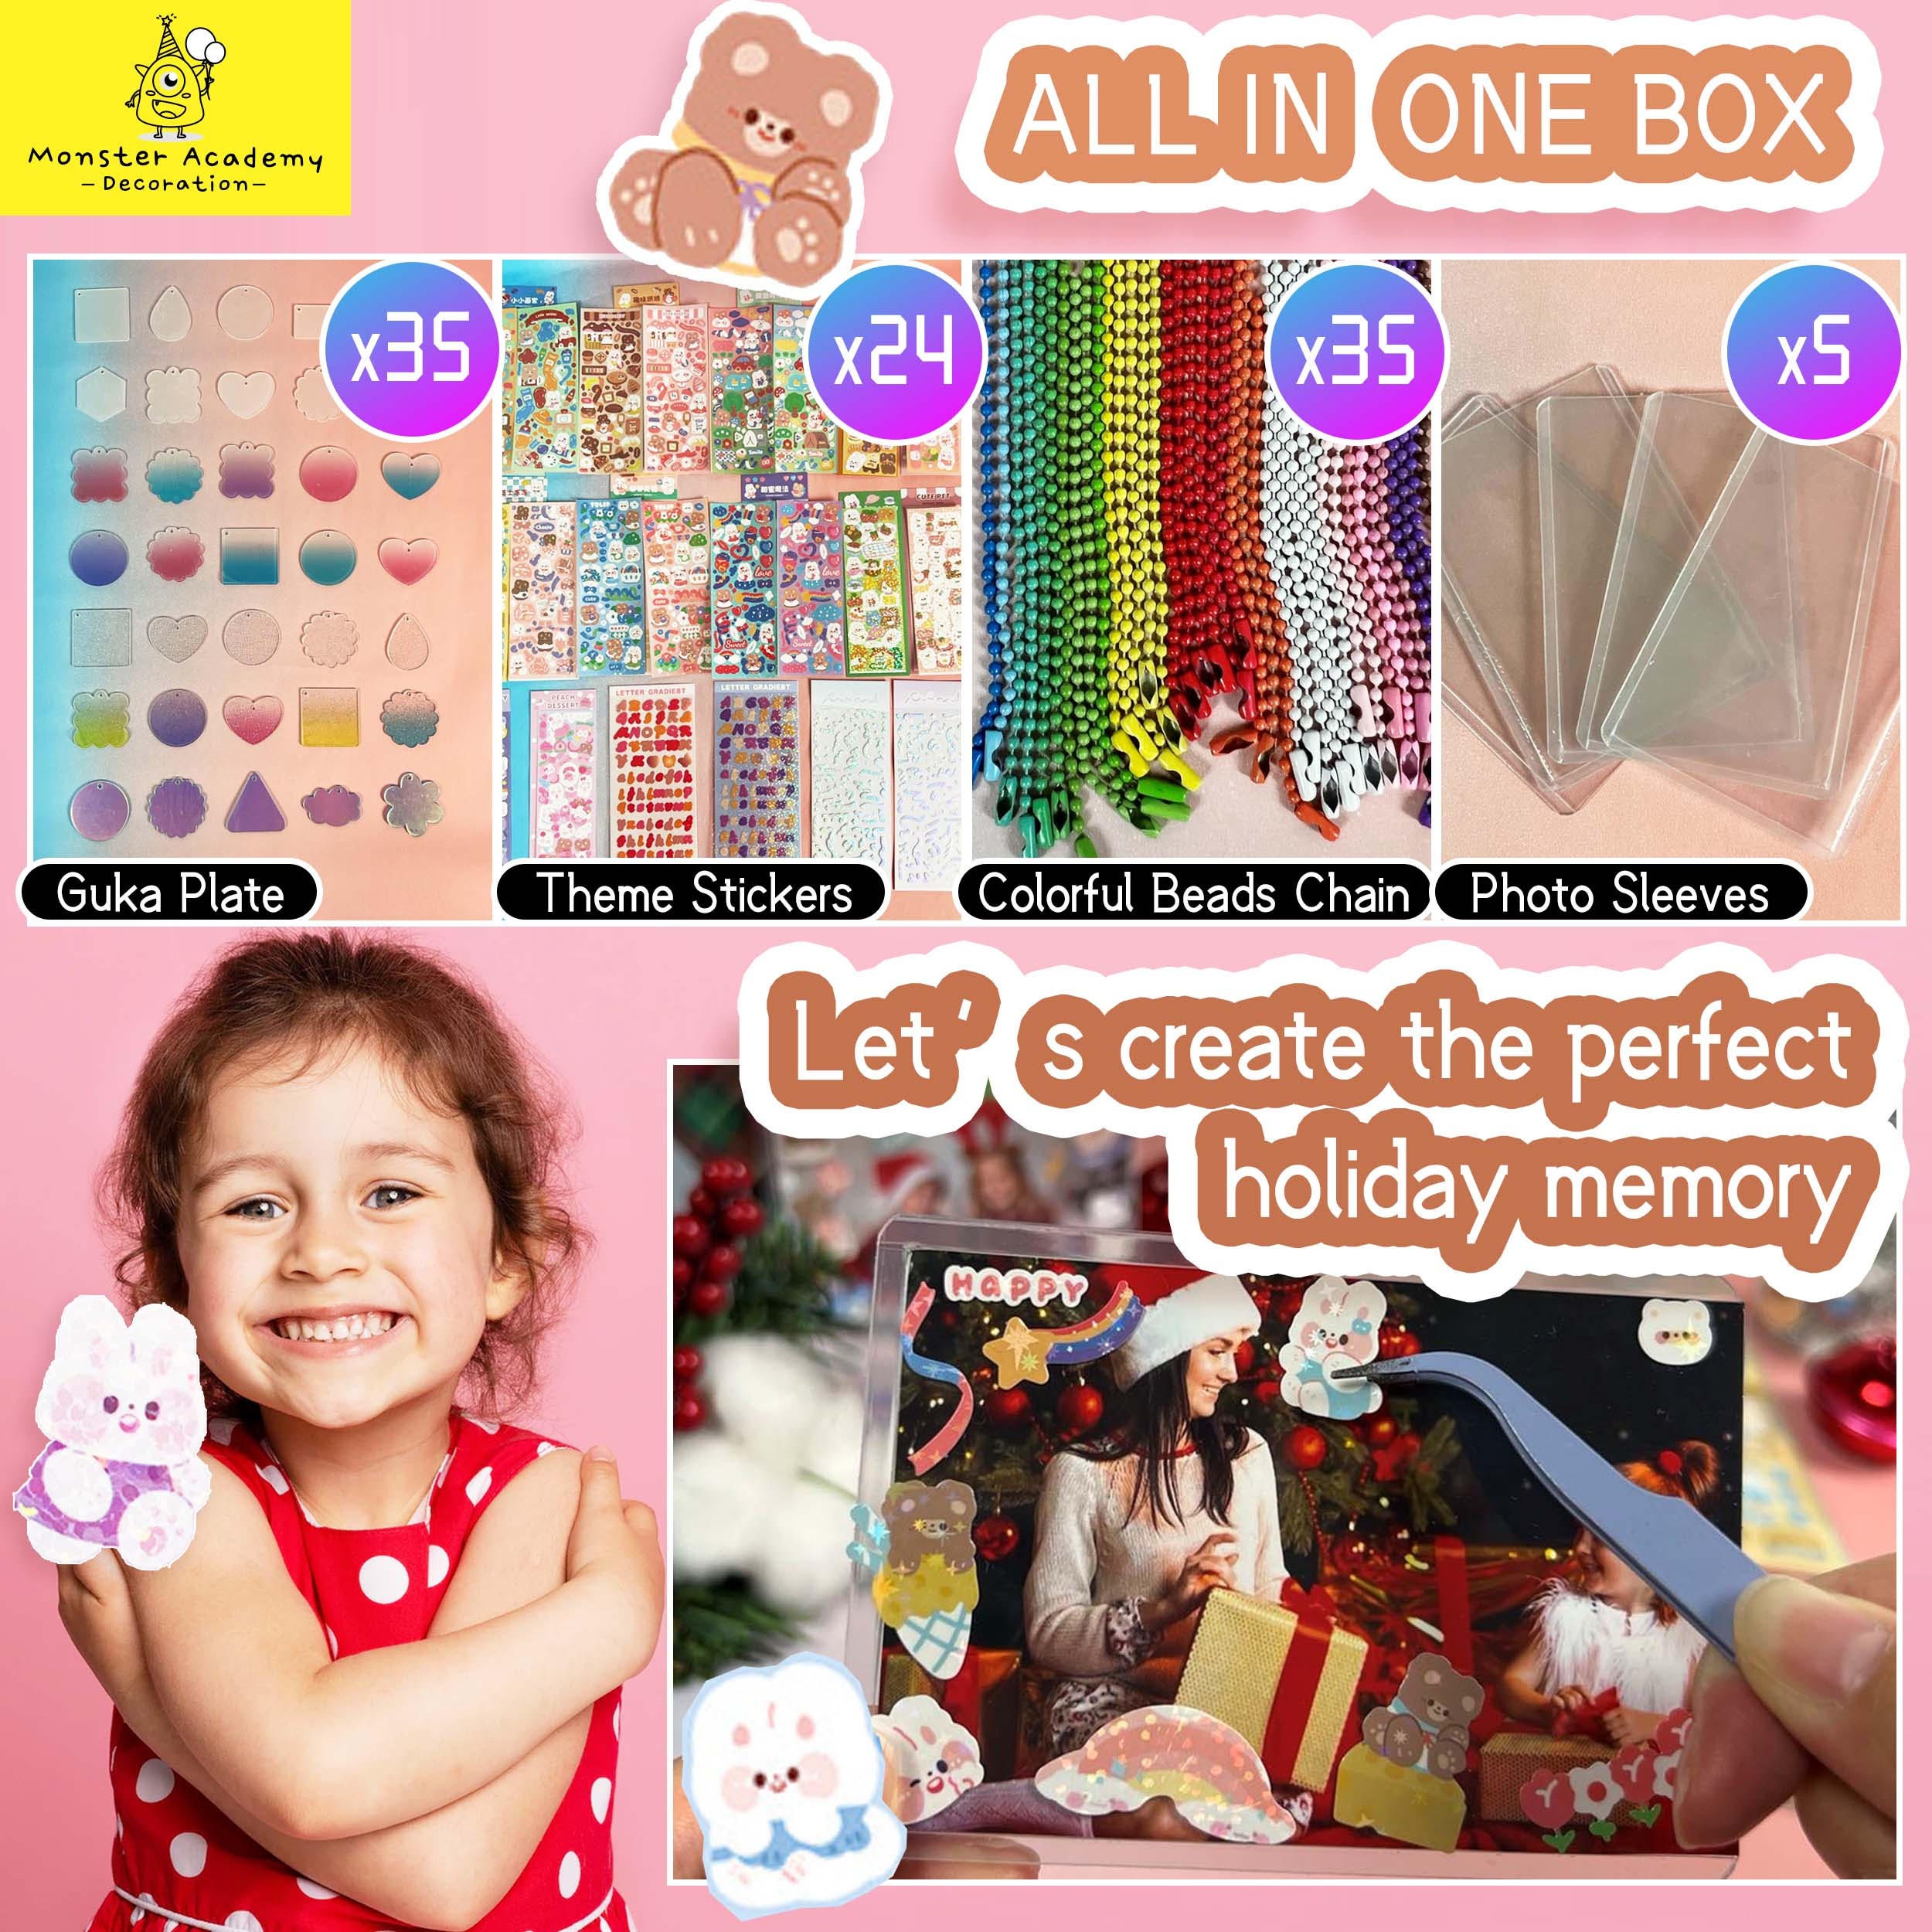 Groovy Gal gift set – Two Girls Crafts